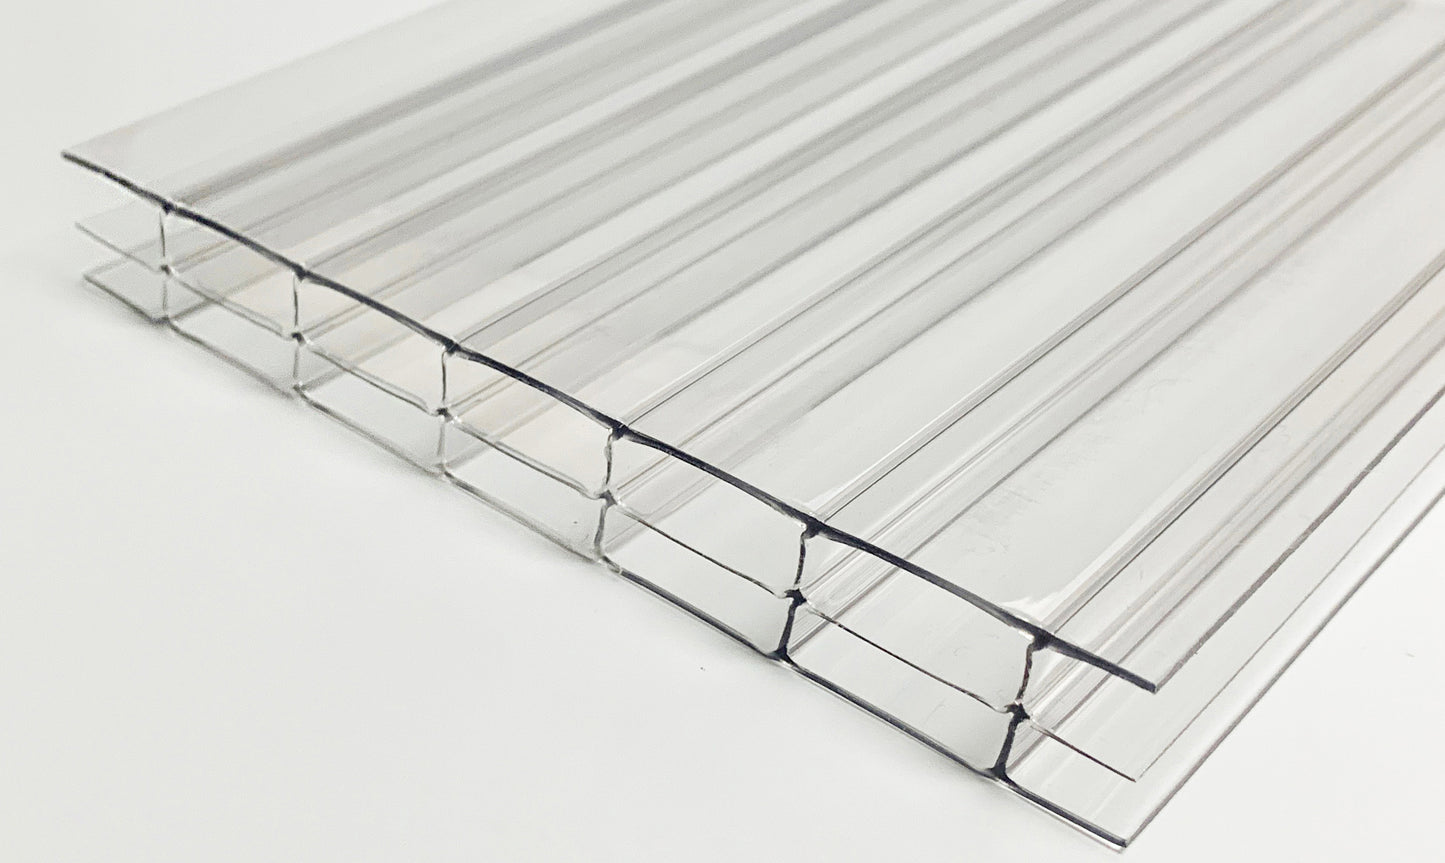 Triple Wall - Clear 16mm - Polycarbonate Sheets